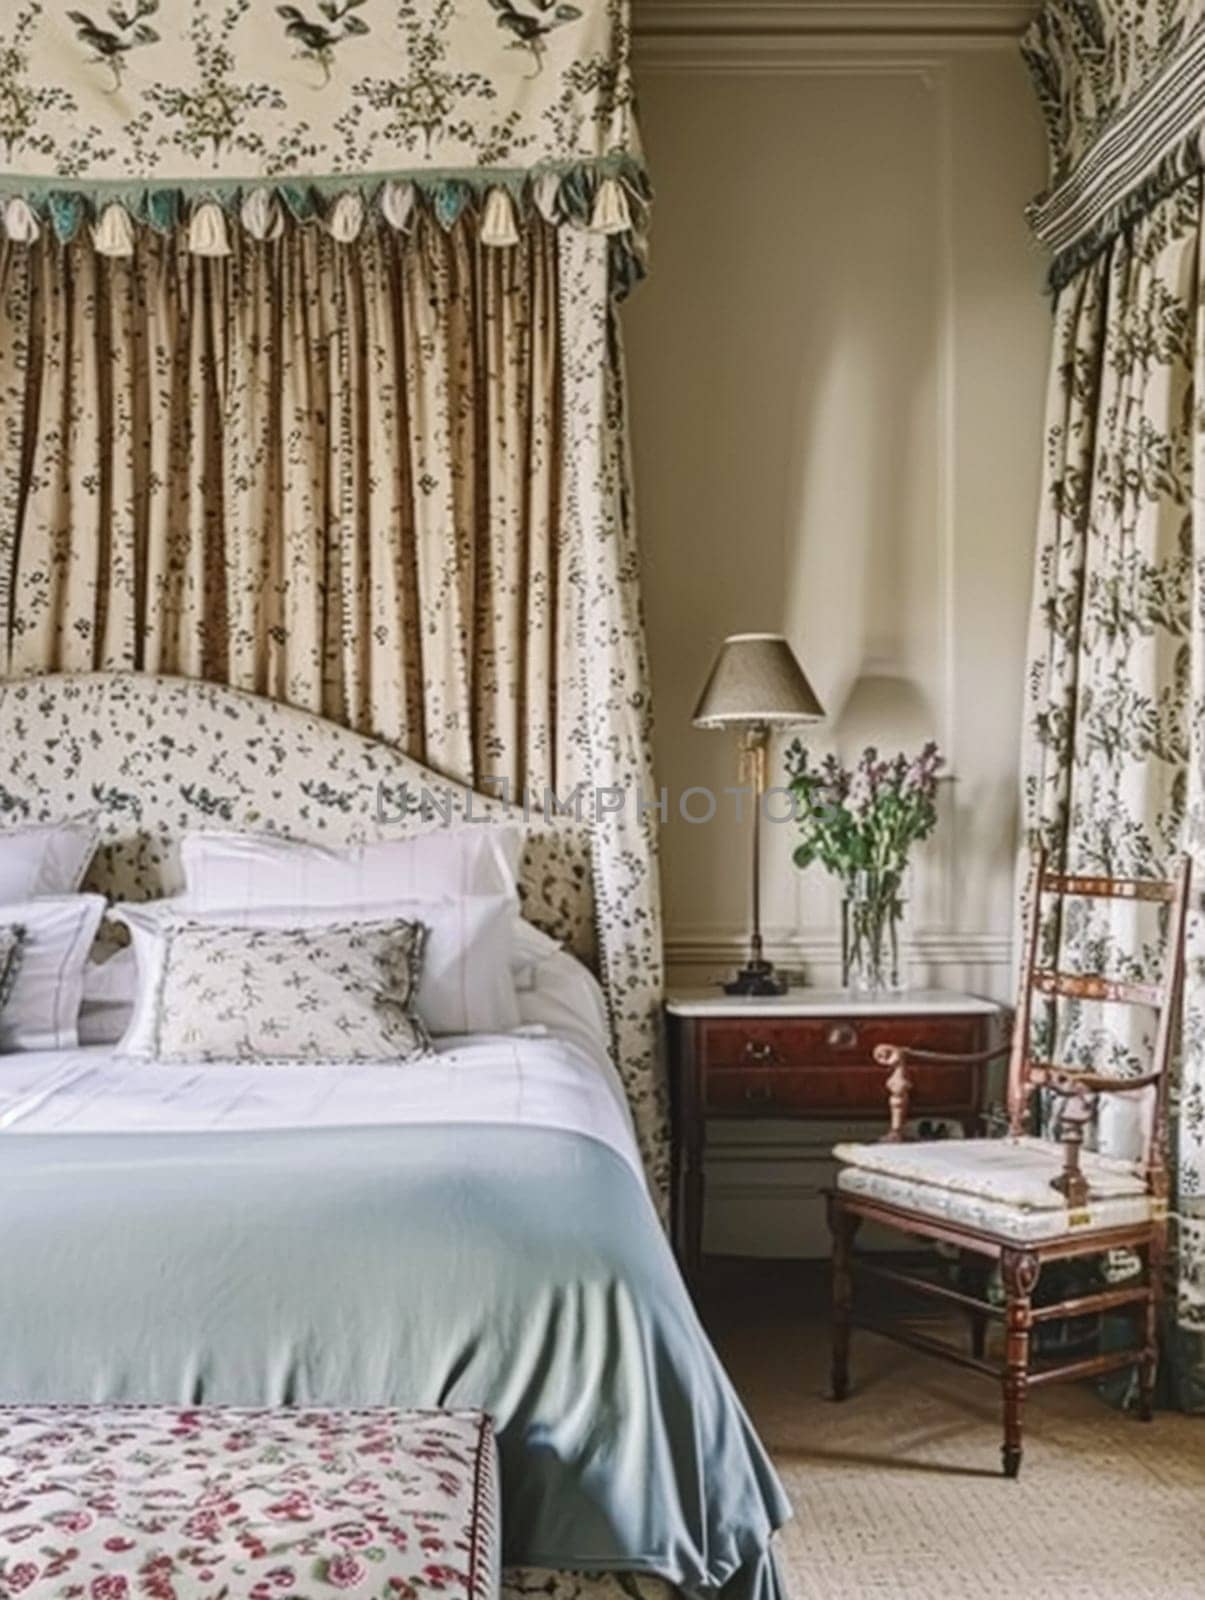 Elegantly appointed bedroom exudes vintage charm with its floral patterned drapery and bedding, complemented by classic furniture and a soft, inviting colour palette by Anneleven